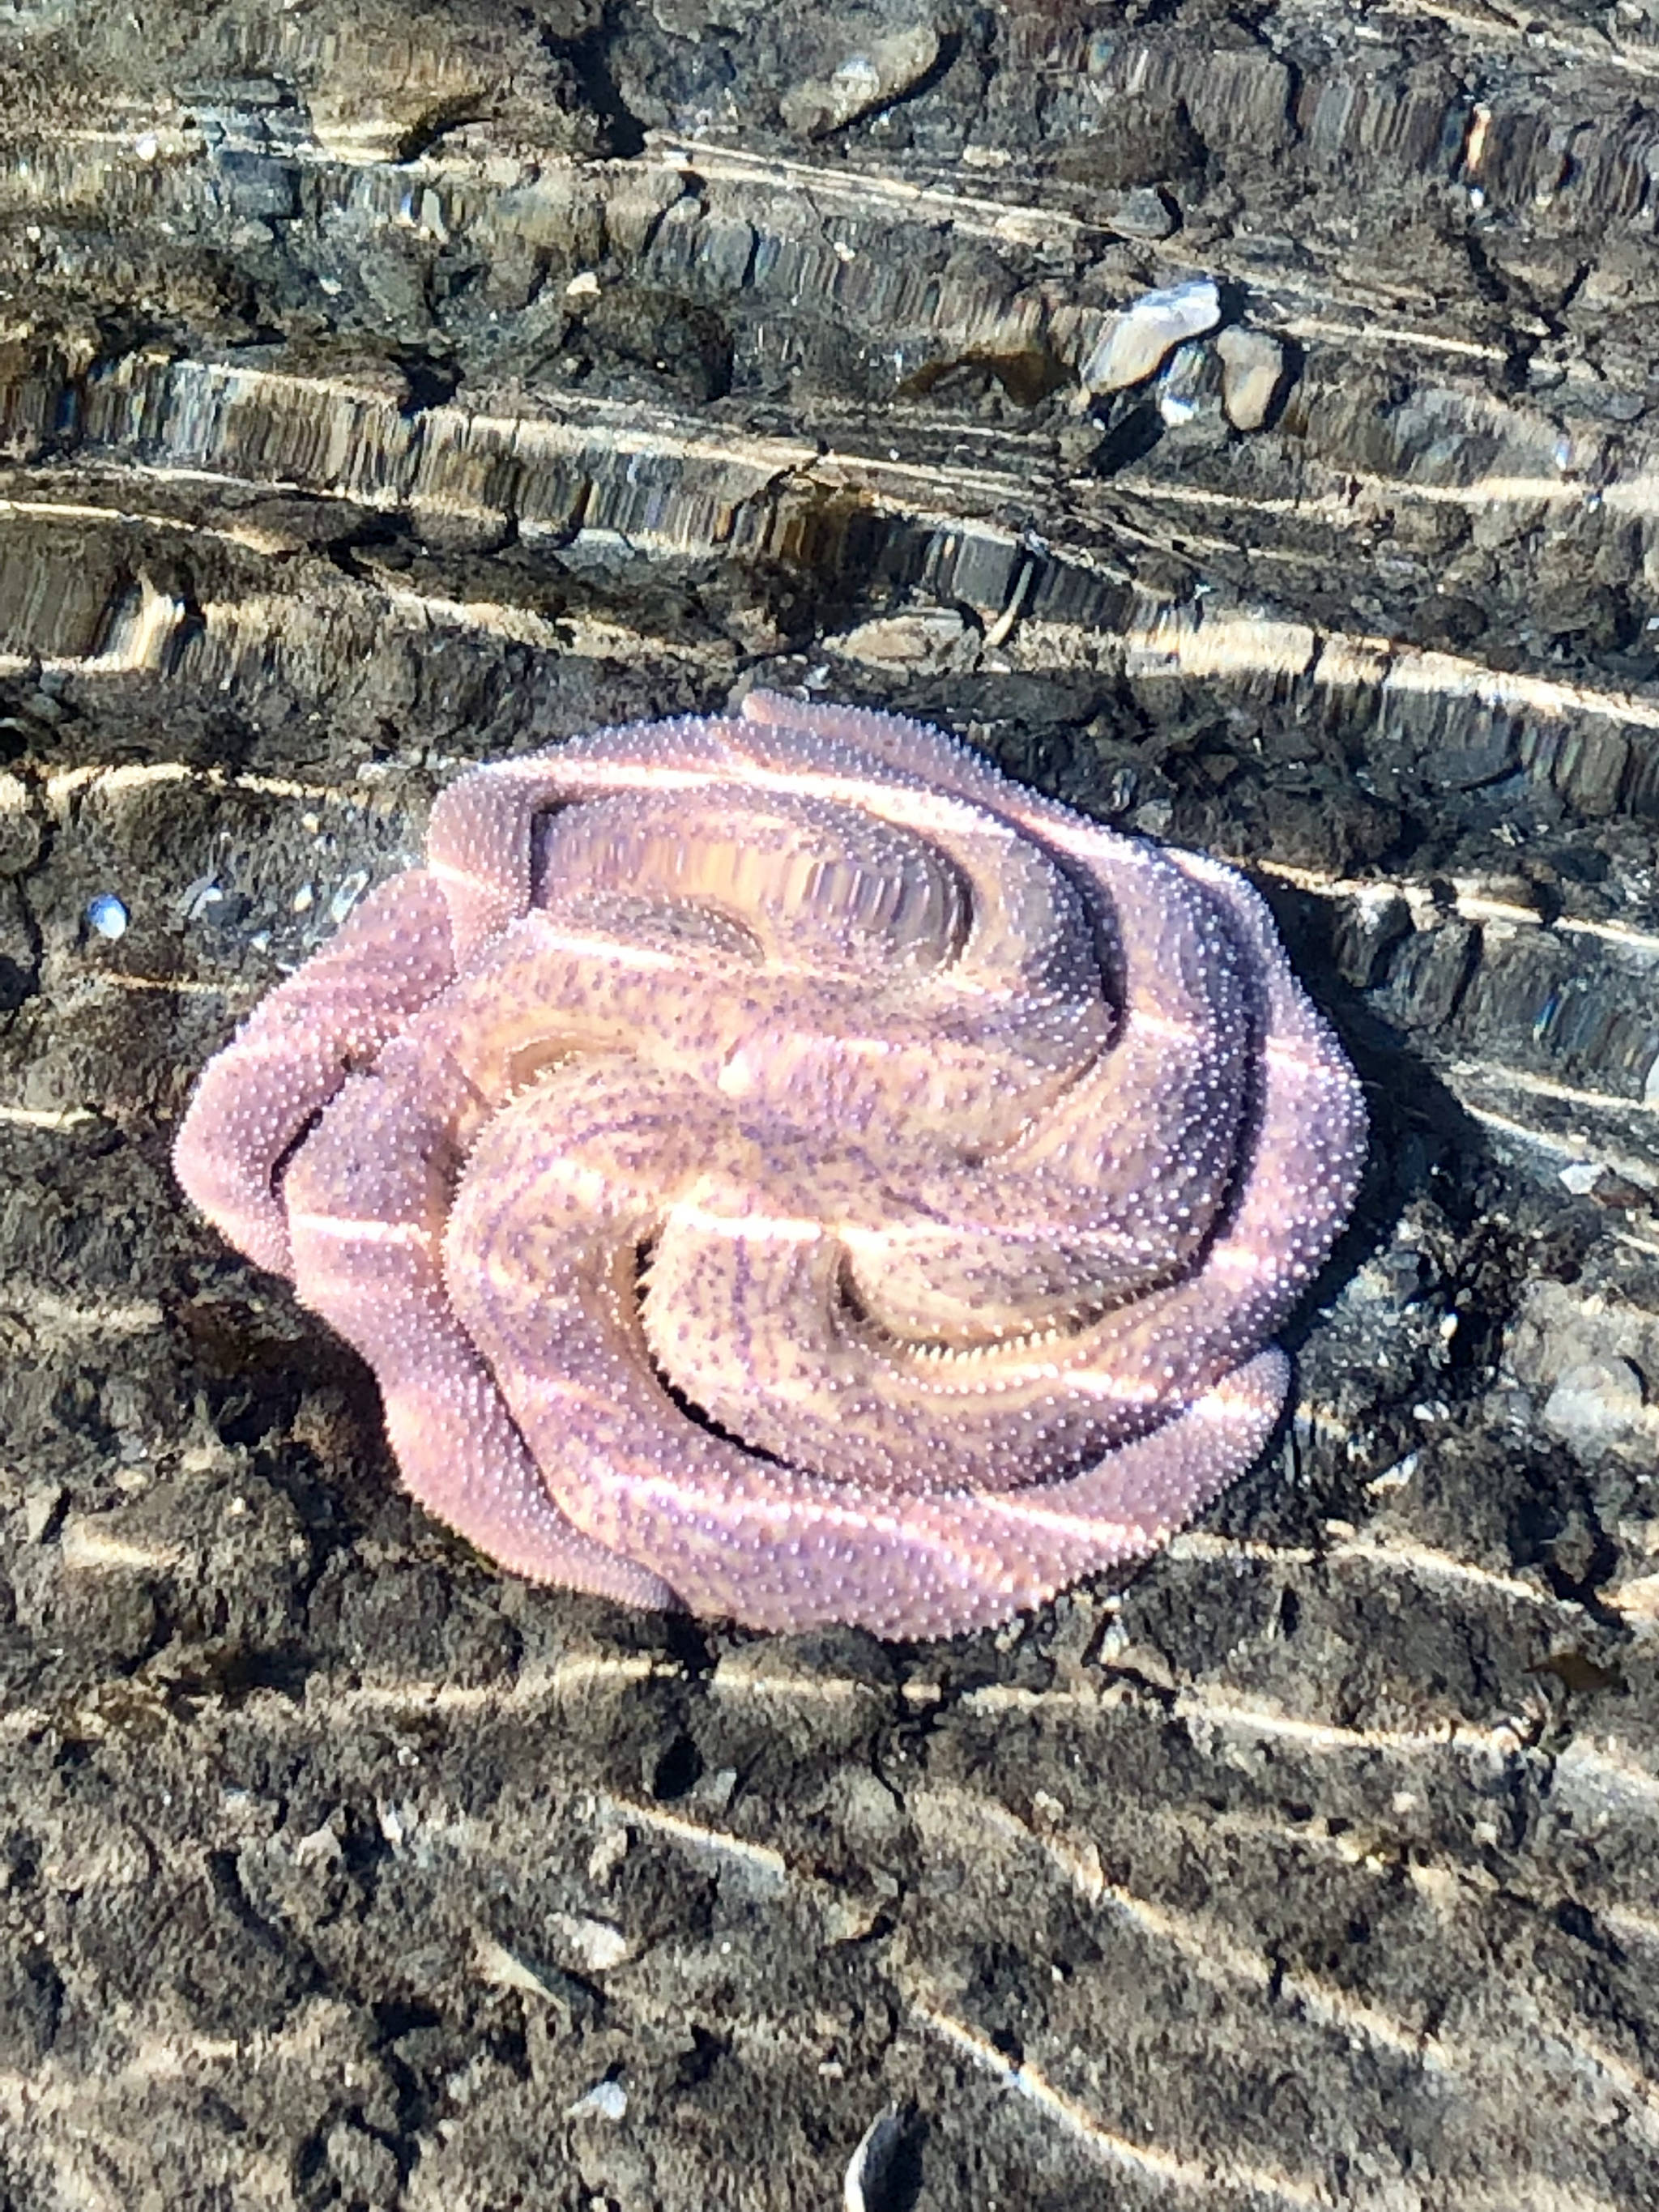 A sea star at low tide on Sheep Creek beach on March 24, 2019. (Courtesy Photo | Donna Pierce)